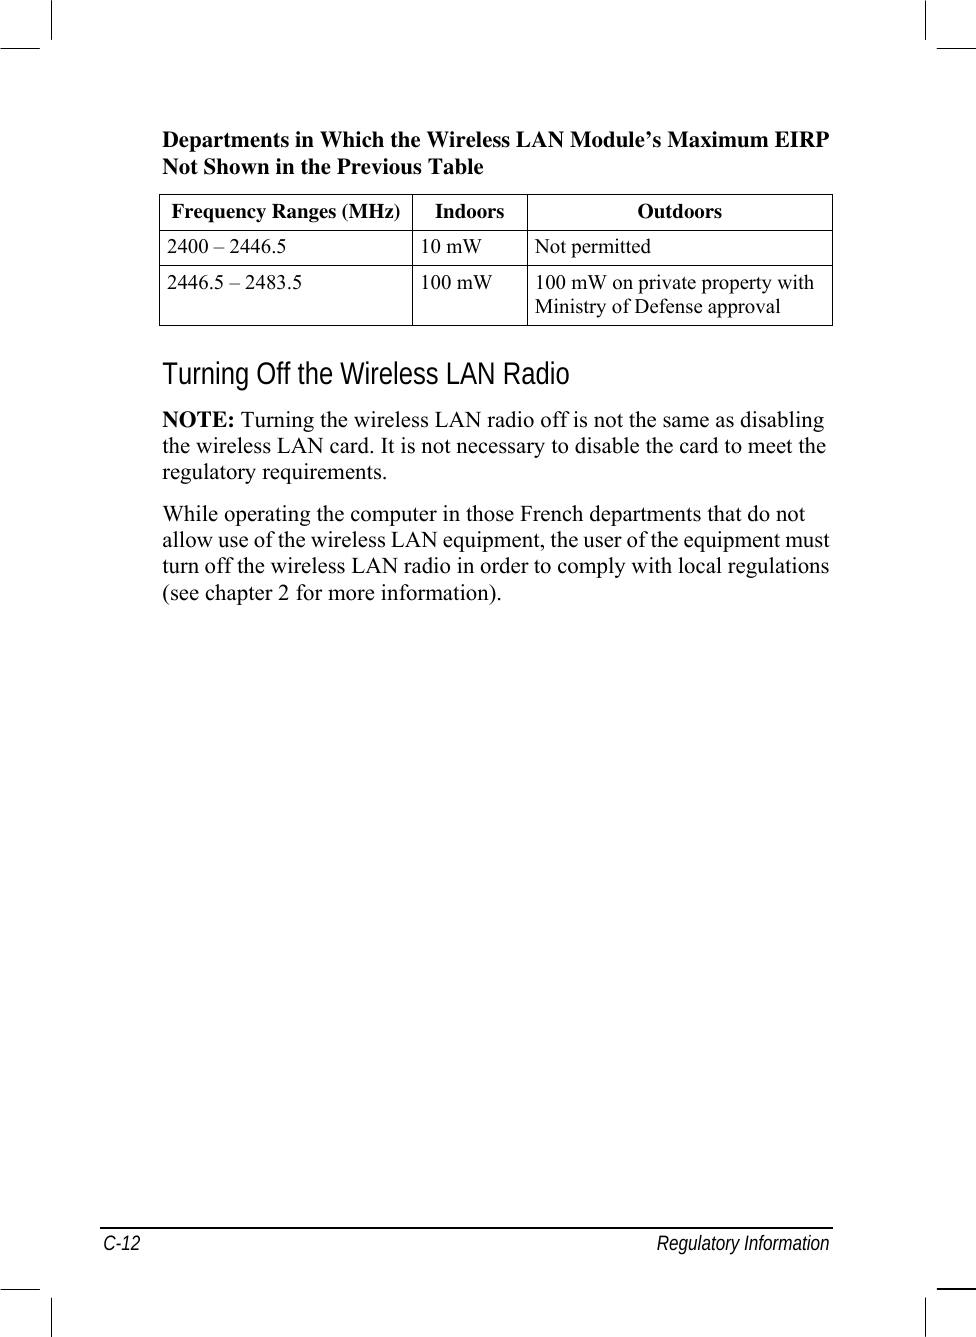  C-12 Regulatory Information Departments in Which the Wireless LAN Module’s Maximum EIRP Not Shown in the Previous Table Frequency Ranges (MHz) Indoors  Outdoors 2400 – 2446.5  10 mW  Not permitted 2446.5 – 2483.5  100 mW  100 mW on private property with Ministry of Defense approval  Turning Off the Wireless LAN Radio NOTE: Turning the wireless LAN radio off is not the same as disabling the wireless LAN card. It is not necessary to disable the card to meet the regulatory requirements. While operating the computer in those French departments that do not allow use of the wireless LAN equipment, the user of the equipment must turn off the wireless LAN radio in order to comply with local regulations (see chapter 2 for more information).  